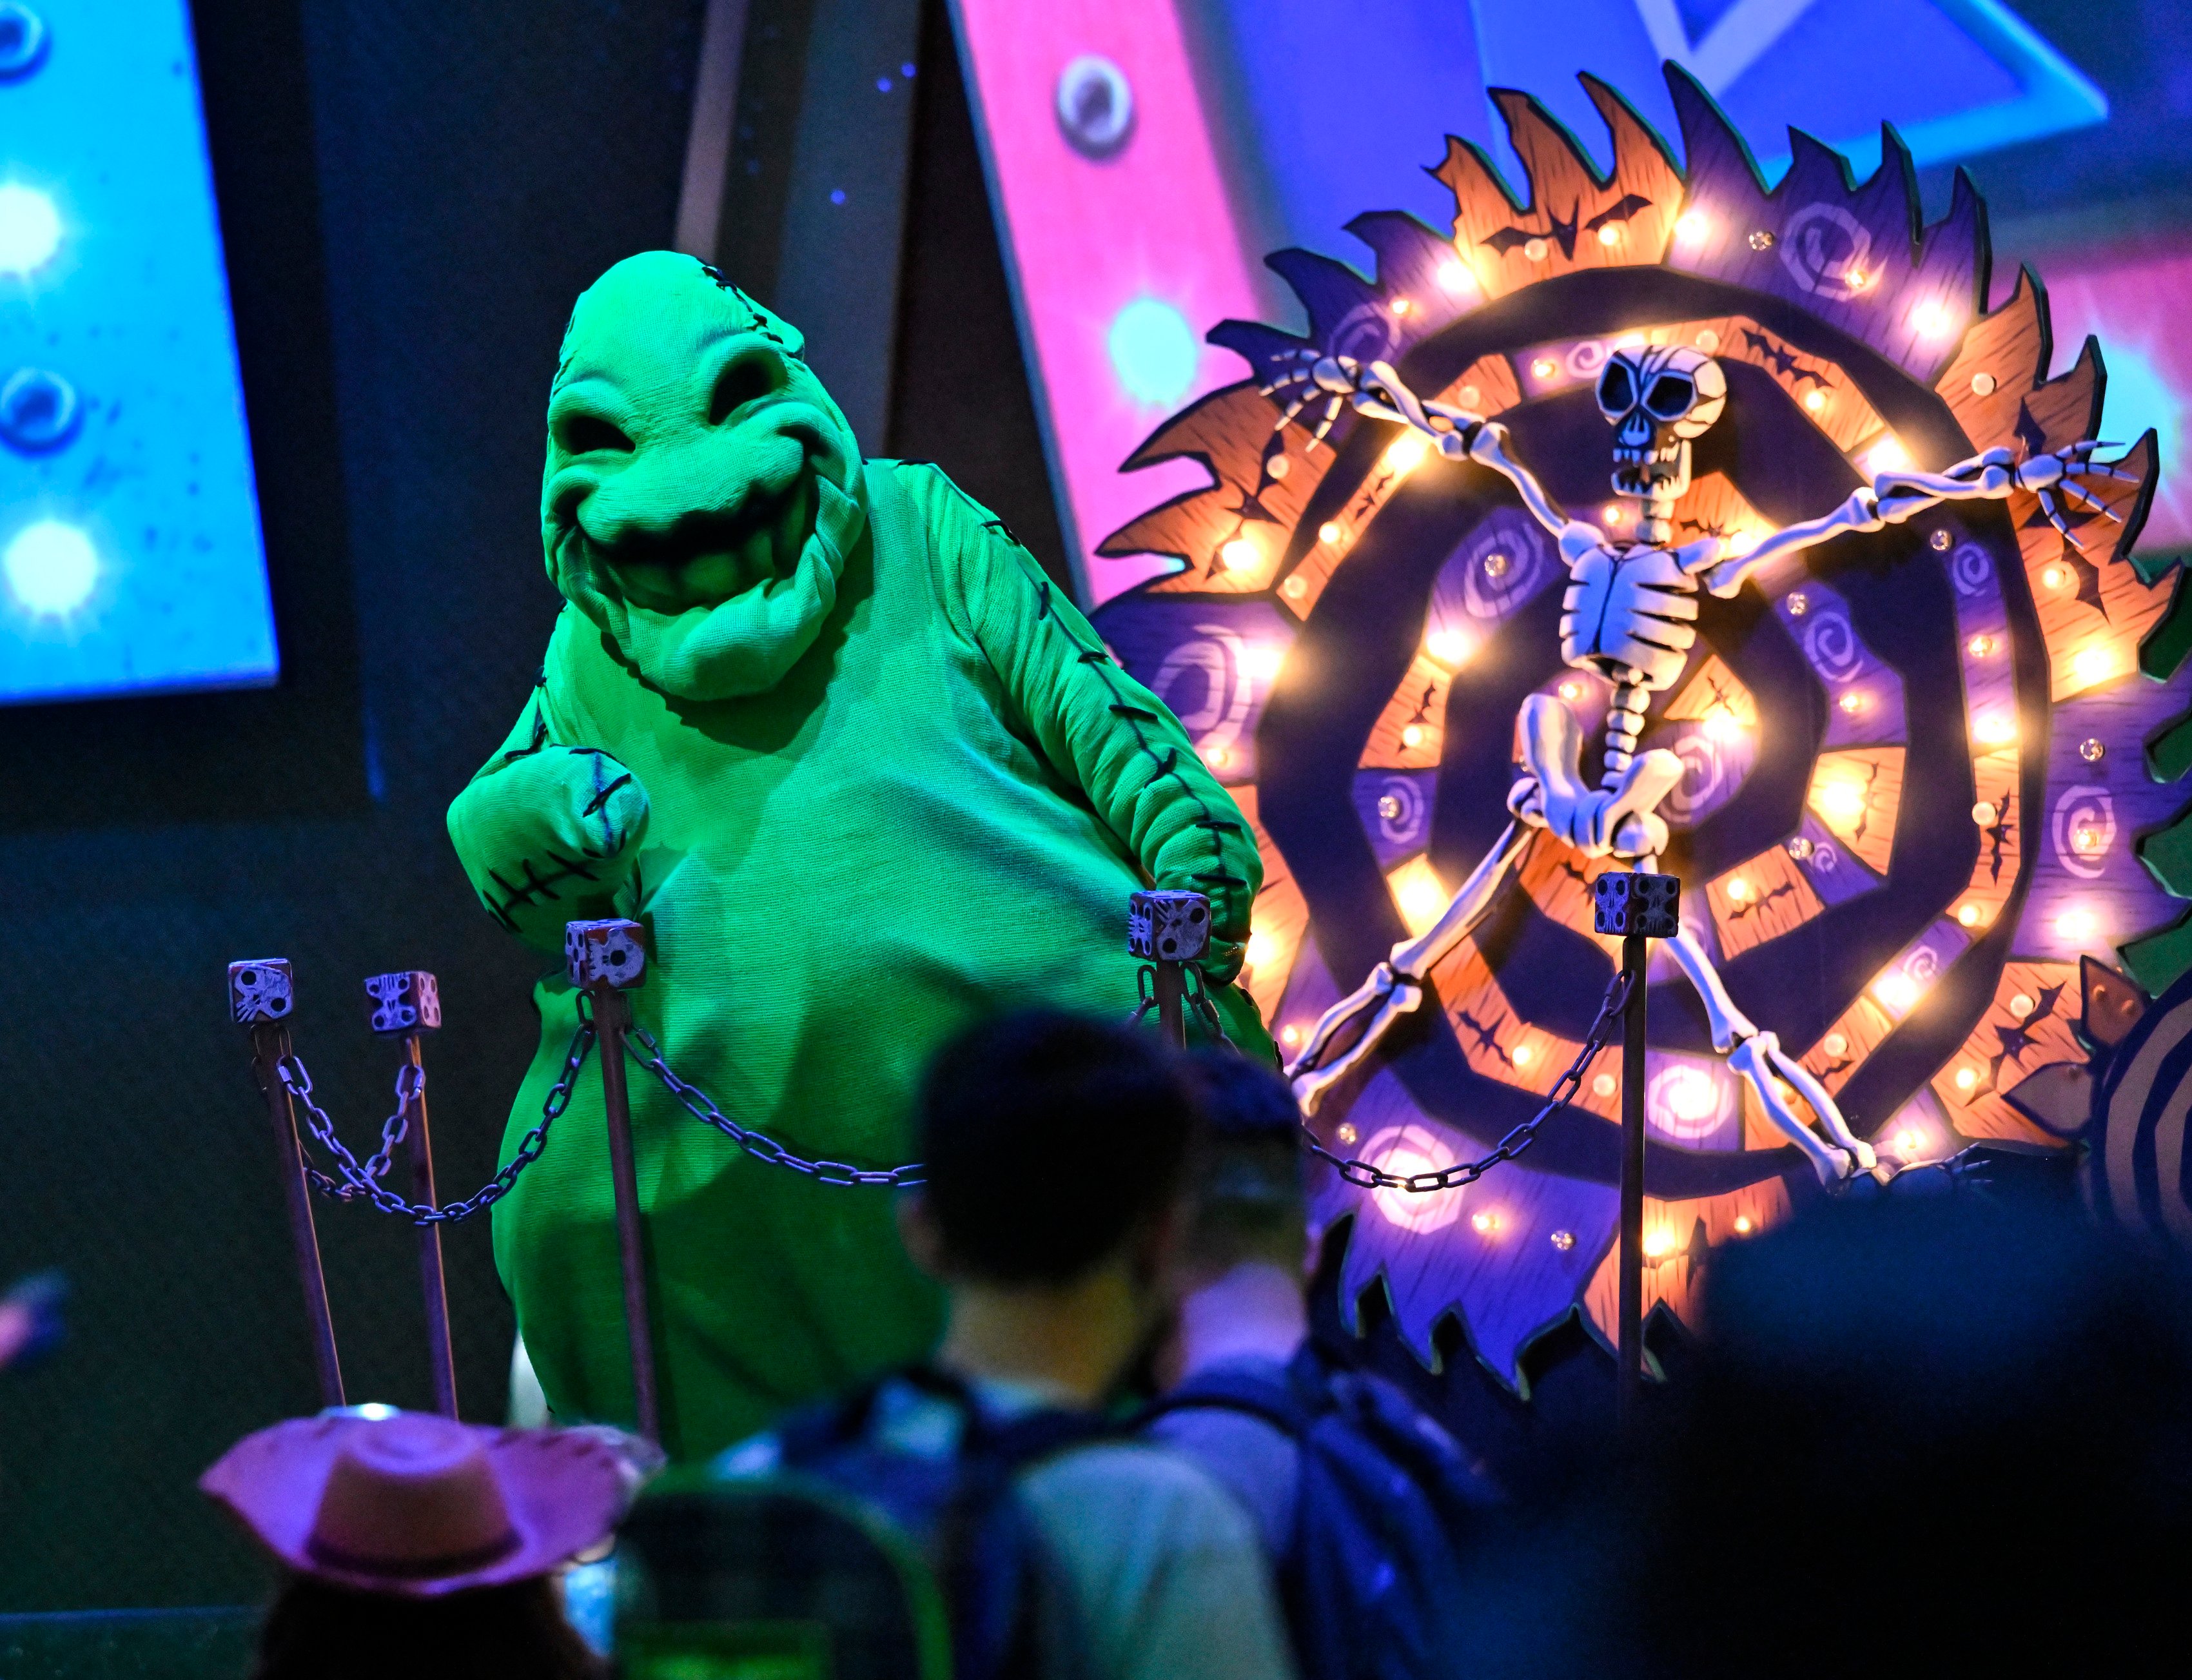 Oogie Boogie, the main antagonist in 'The Nightmare Before Christmas', greets visitors during Oogie Boogie Bash, A Disney Halloween Party